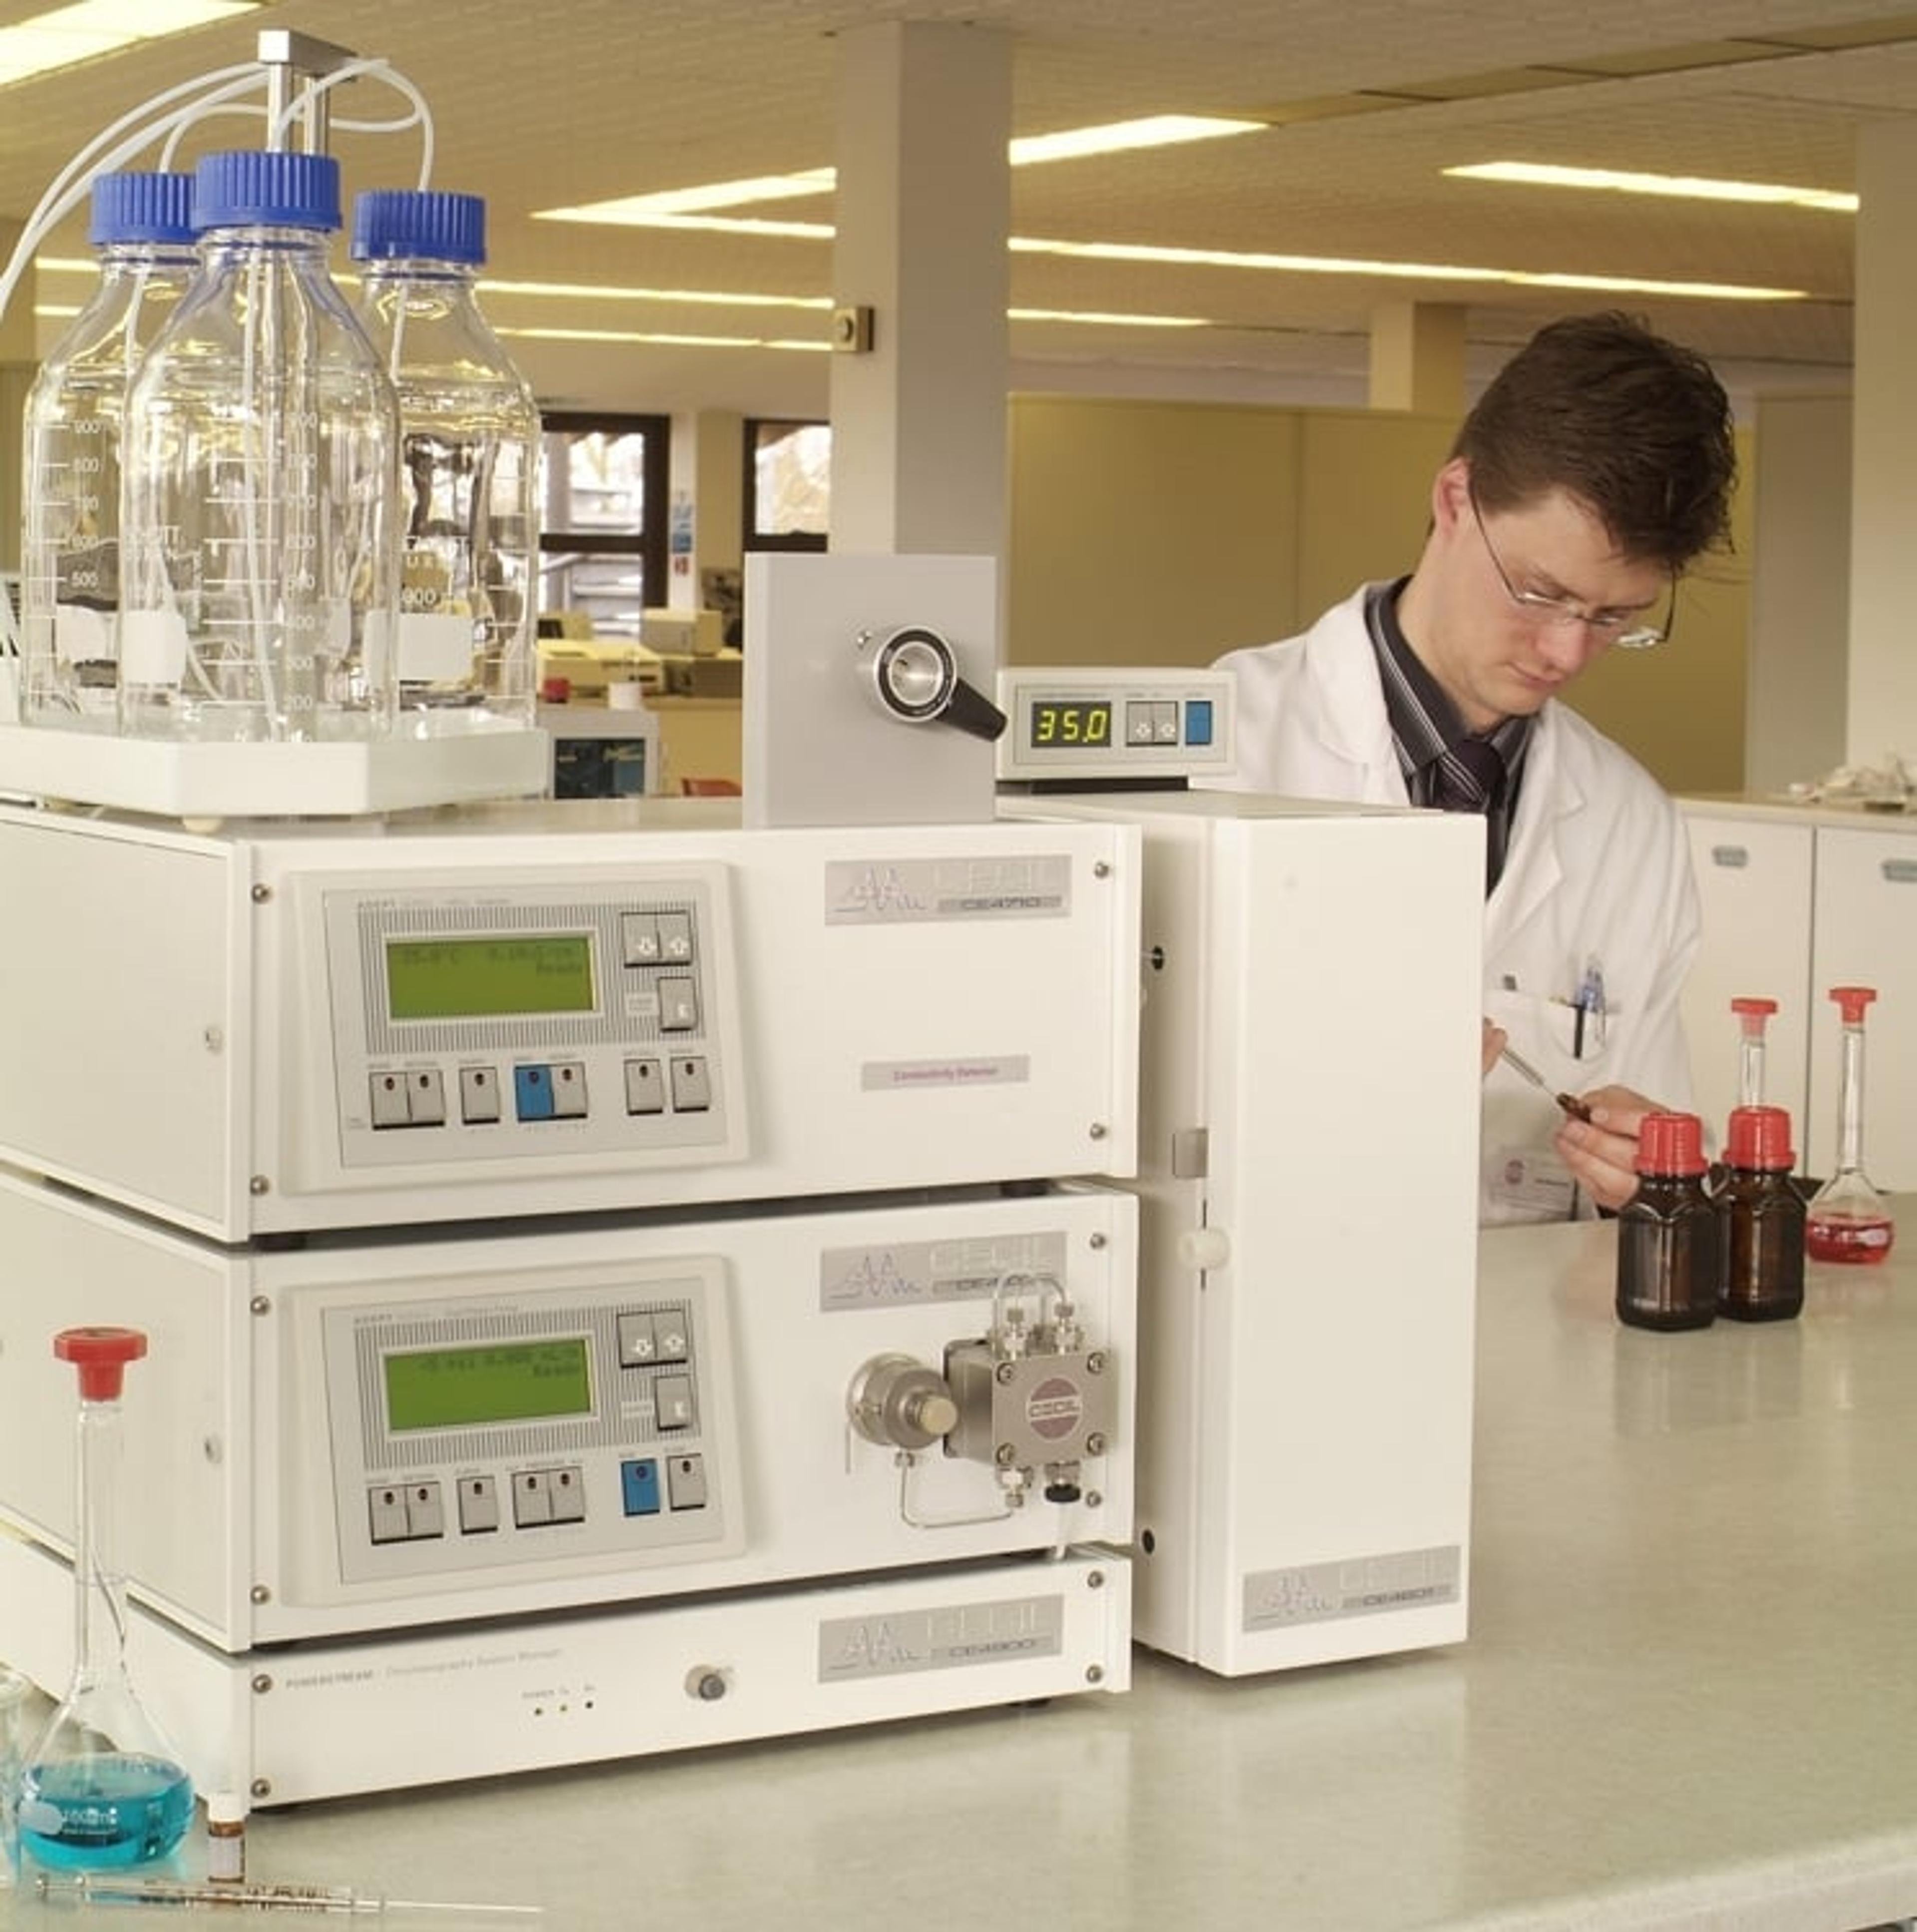 An IonQuest ion chromatography system